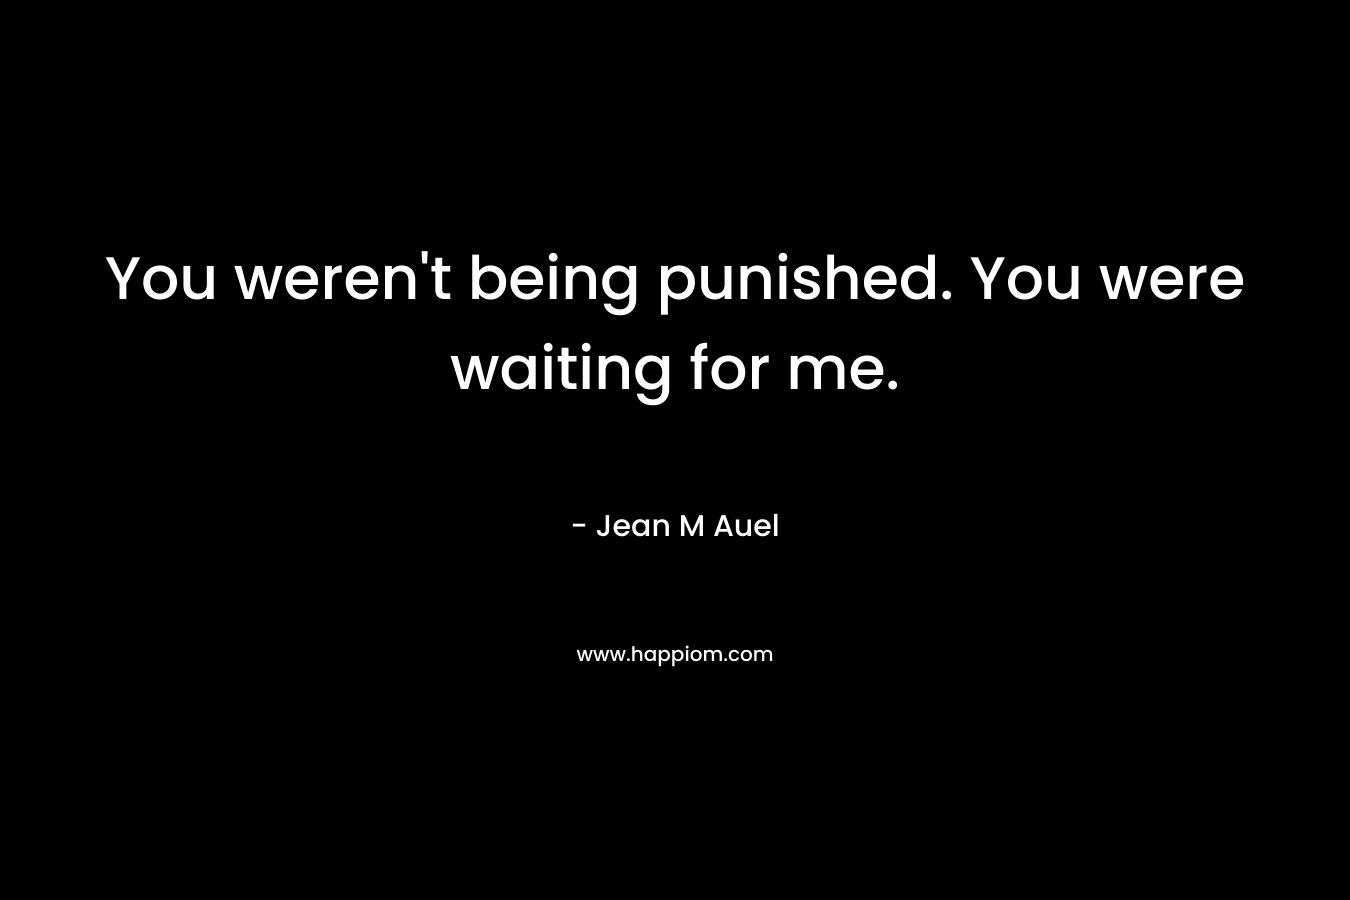 You weren't being punished. You were waiting for me.